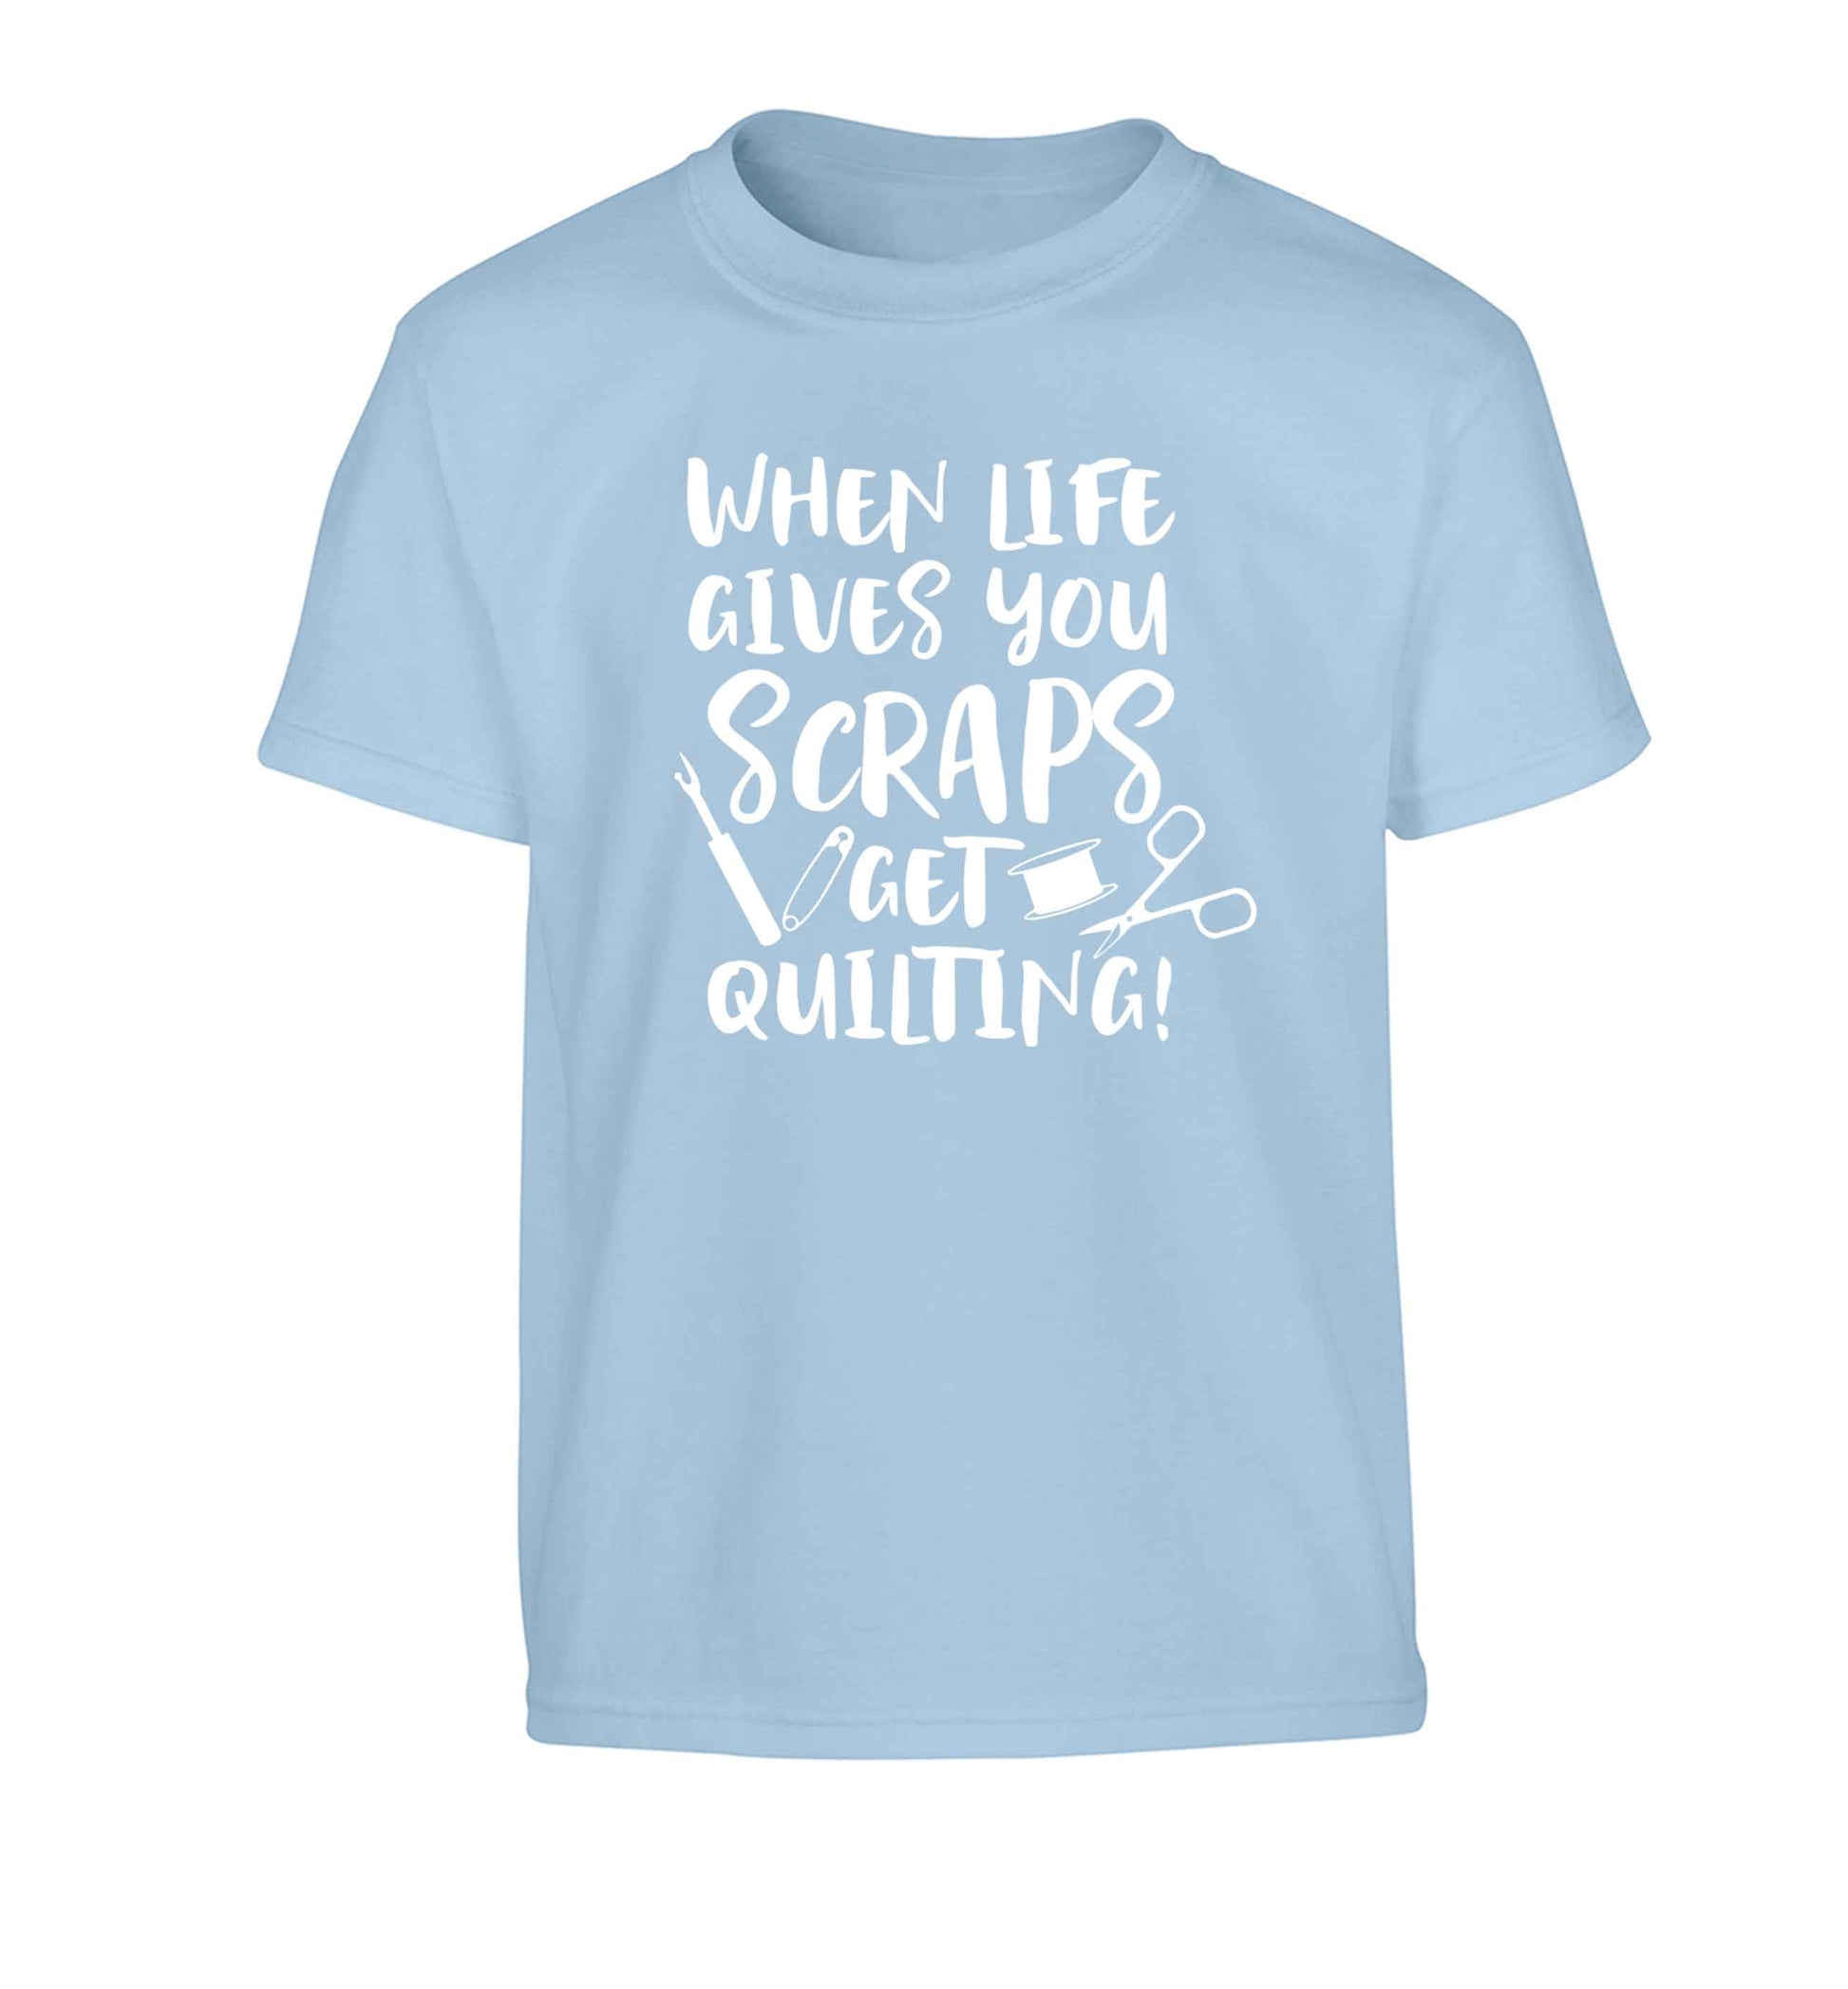 When life gives you scraps get quilting! Children's light blue Tshirt 12-13 Years